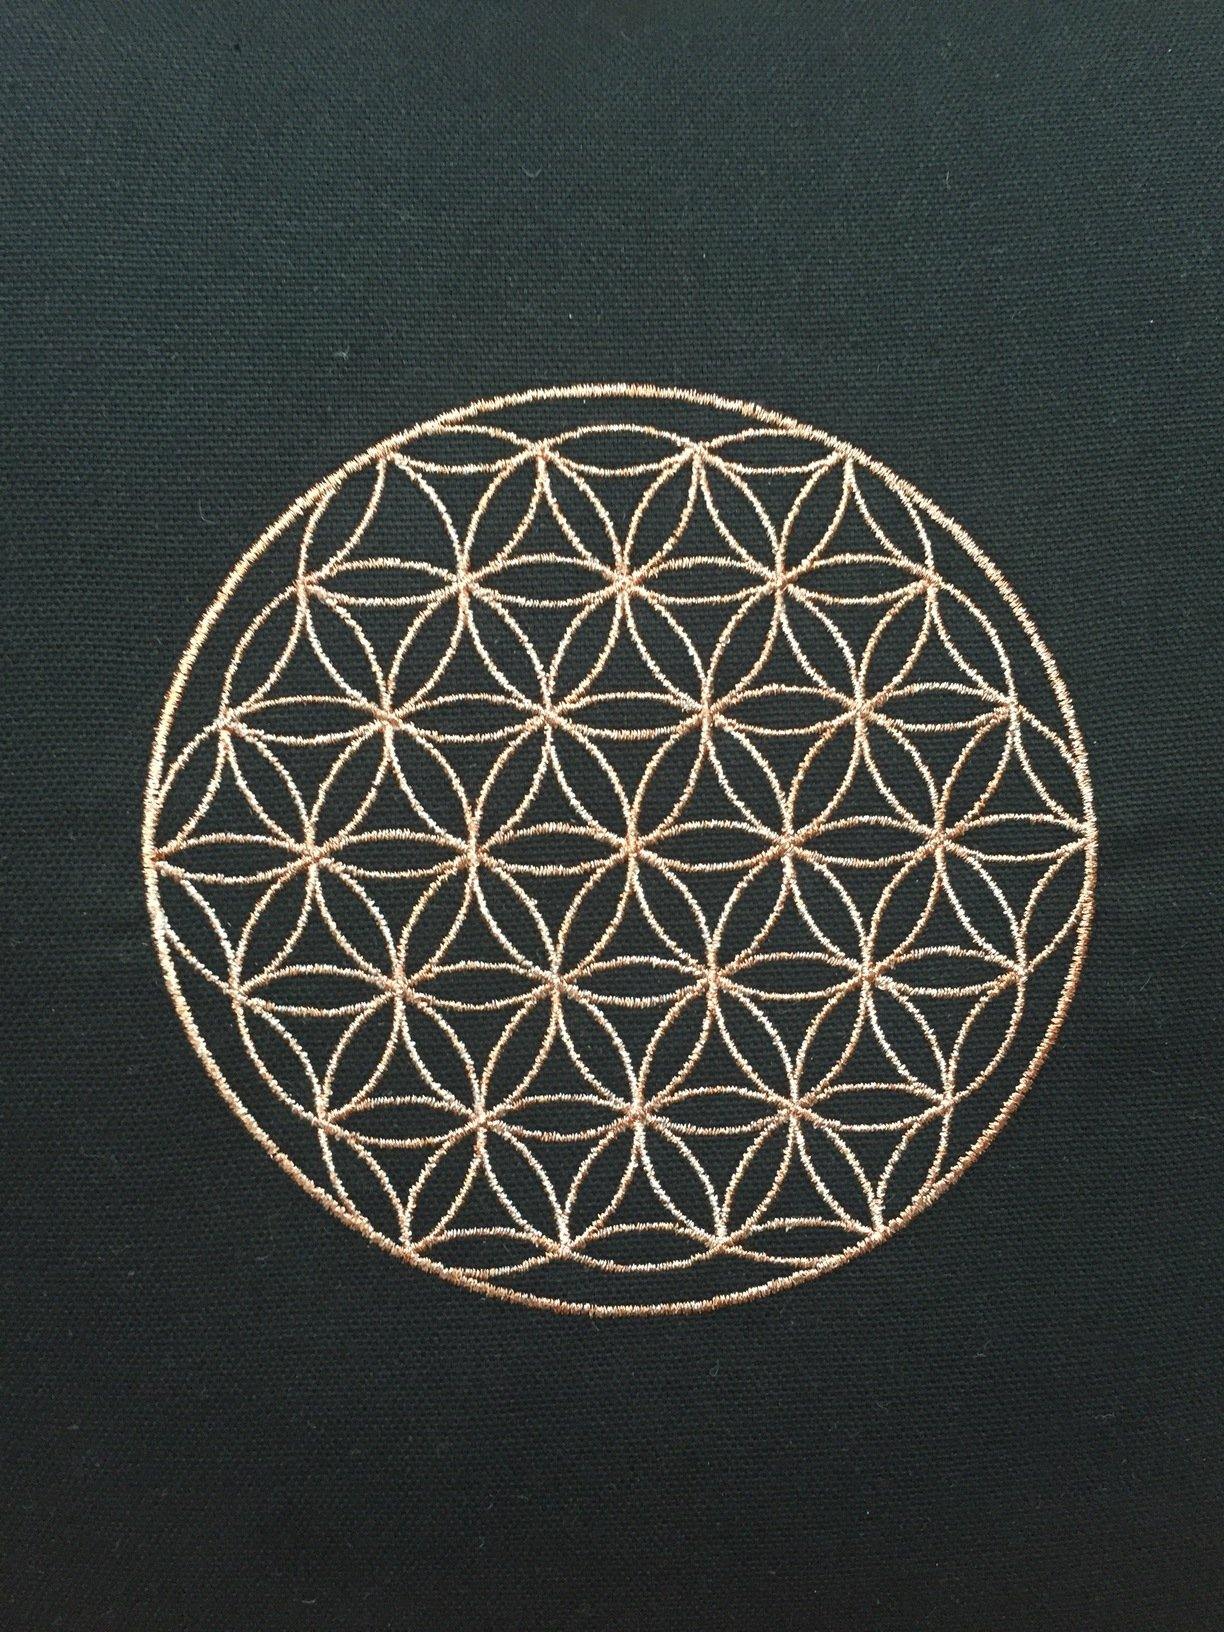 Embroidered Pillow with Flower of Life - Copper - bohemtolia